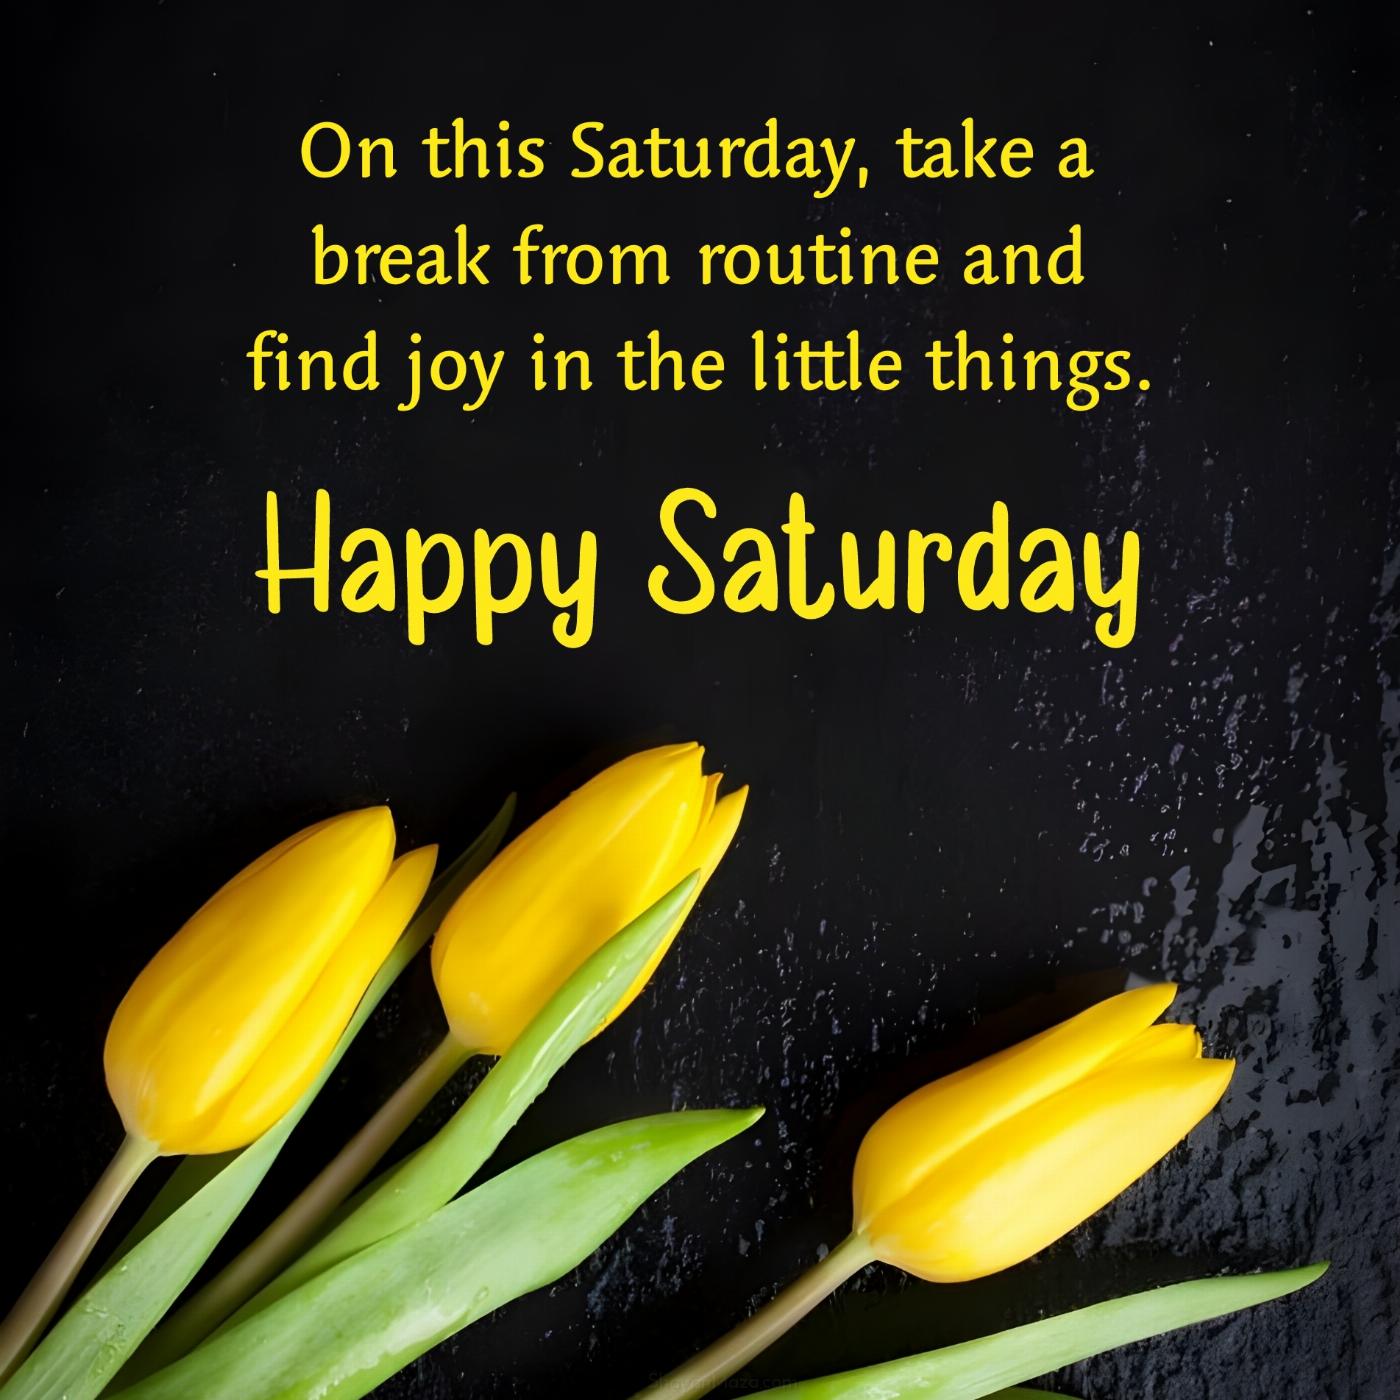 On this Saturday take a break from routine